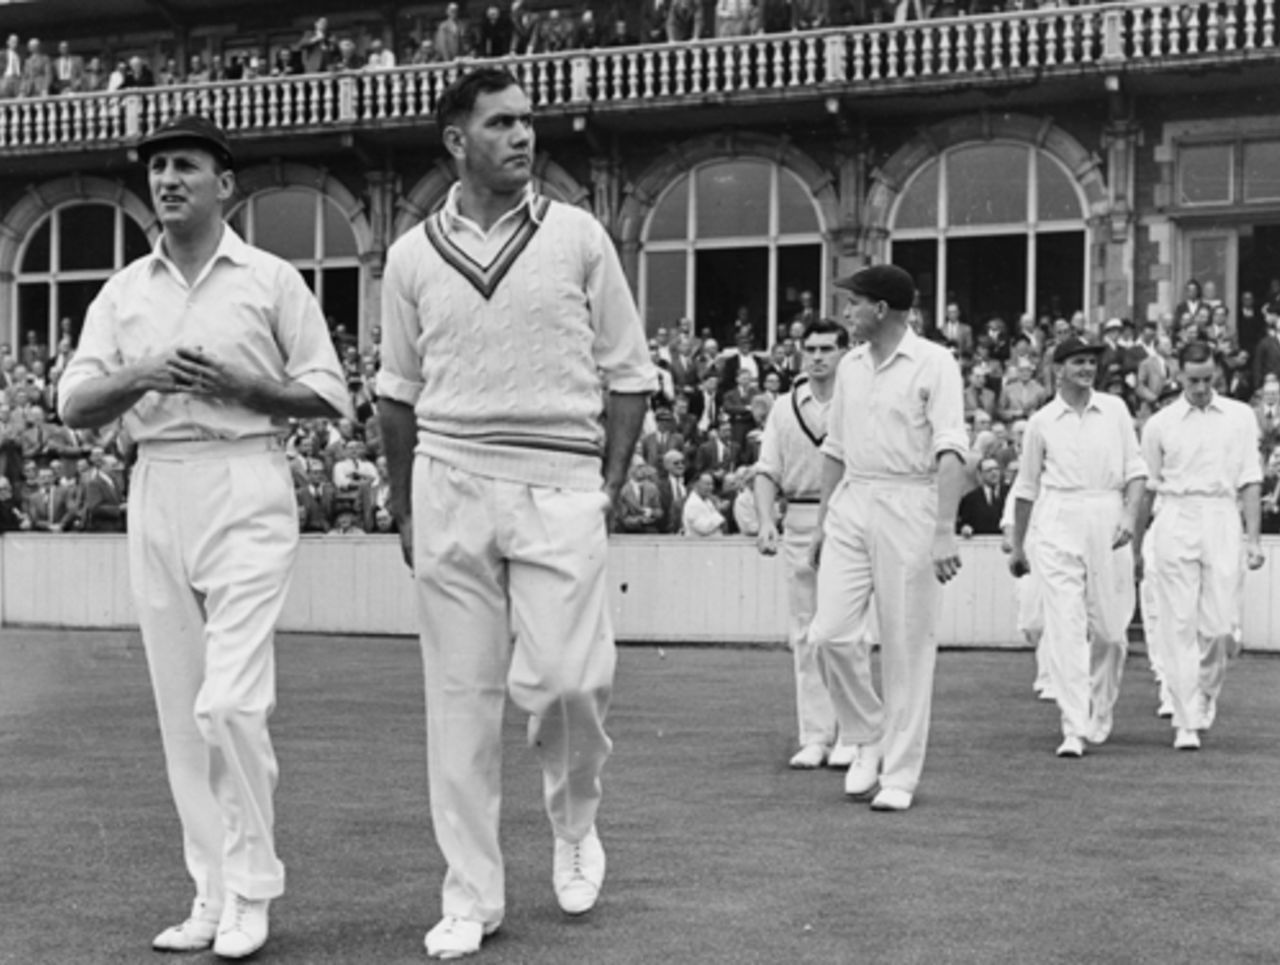 Len Hutton and Alec Bedser lead England onto the field for the fifth Test at The Oval with the Ashes at stake, England v Australia, The Oval, August 1953